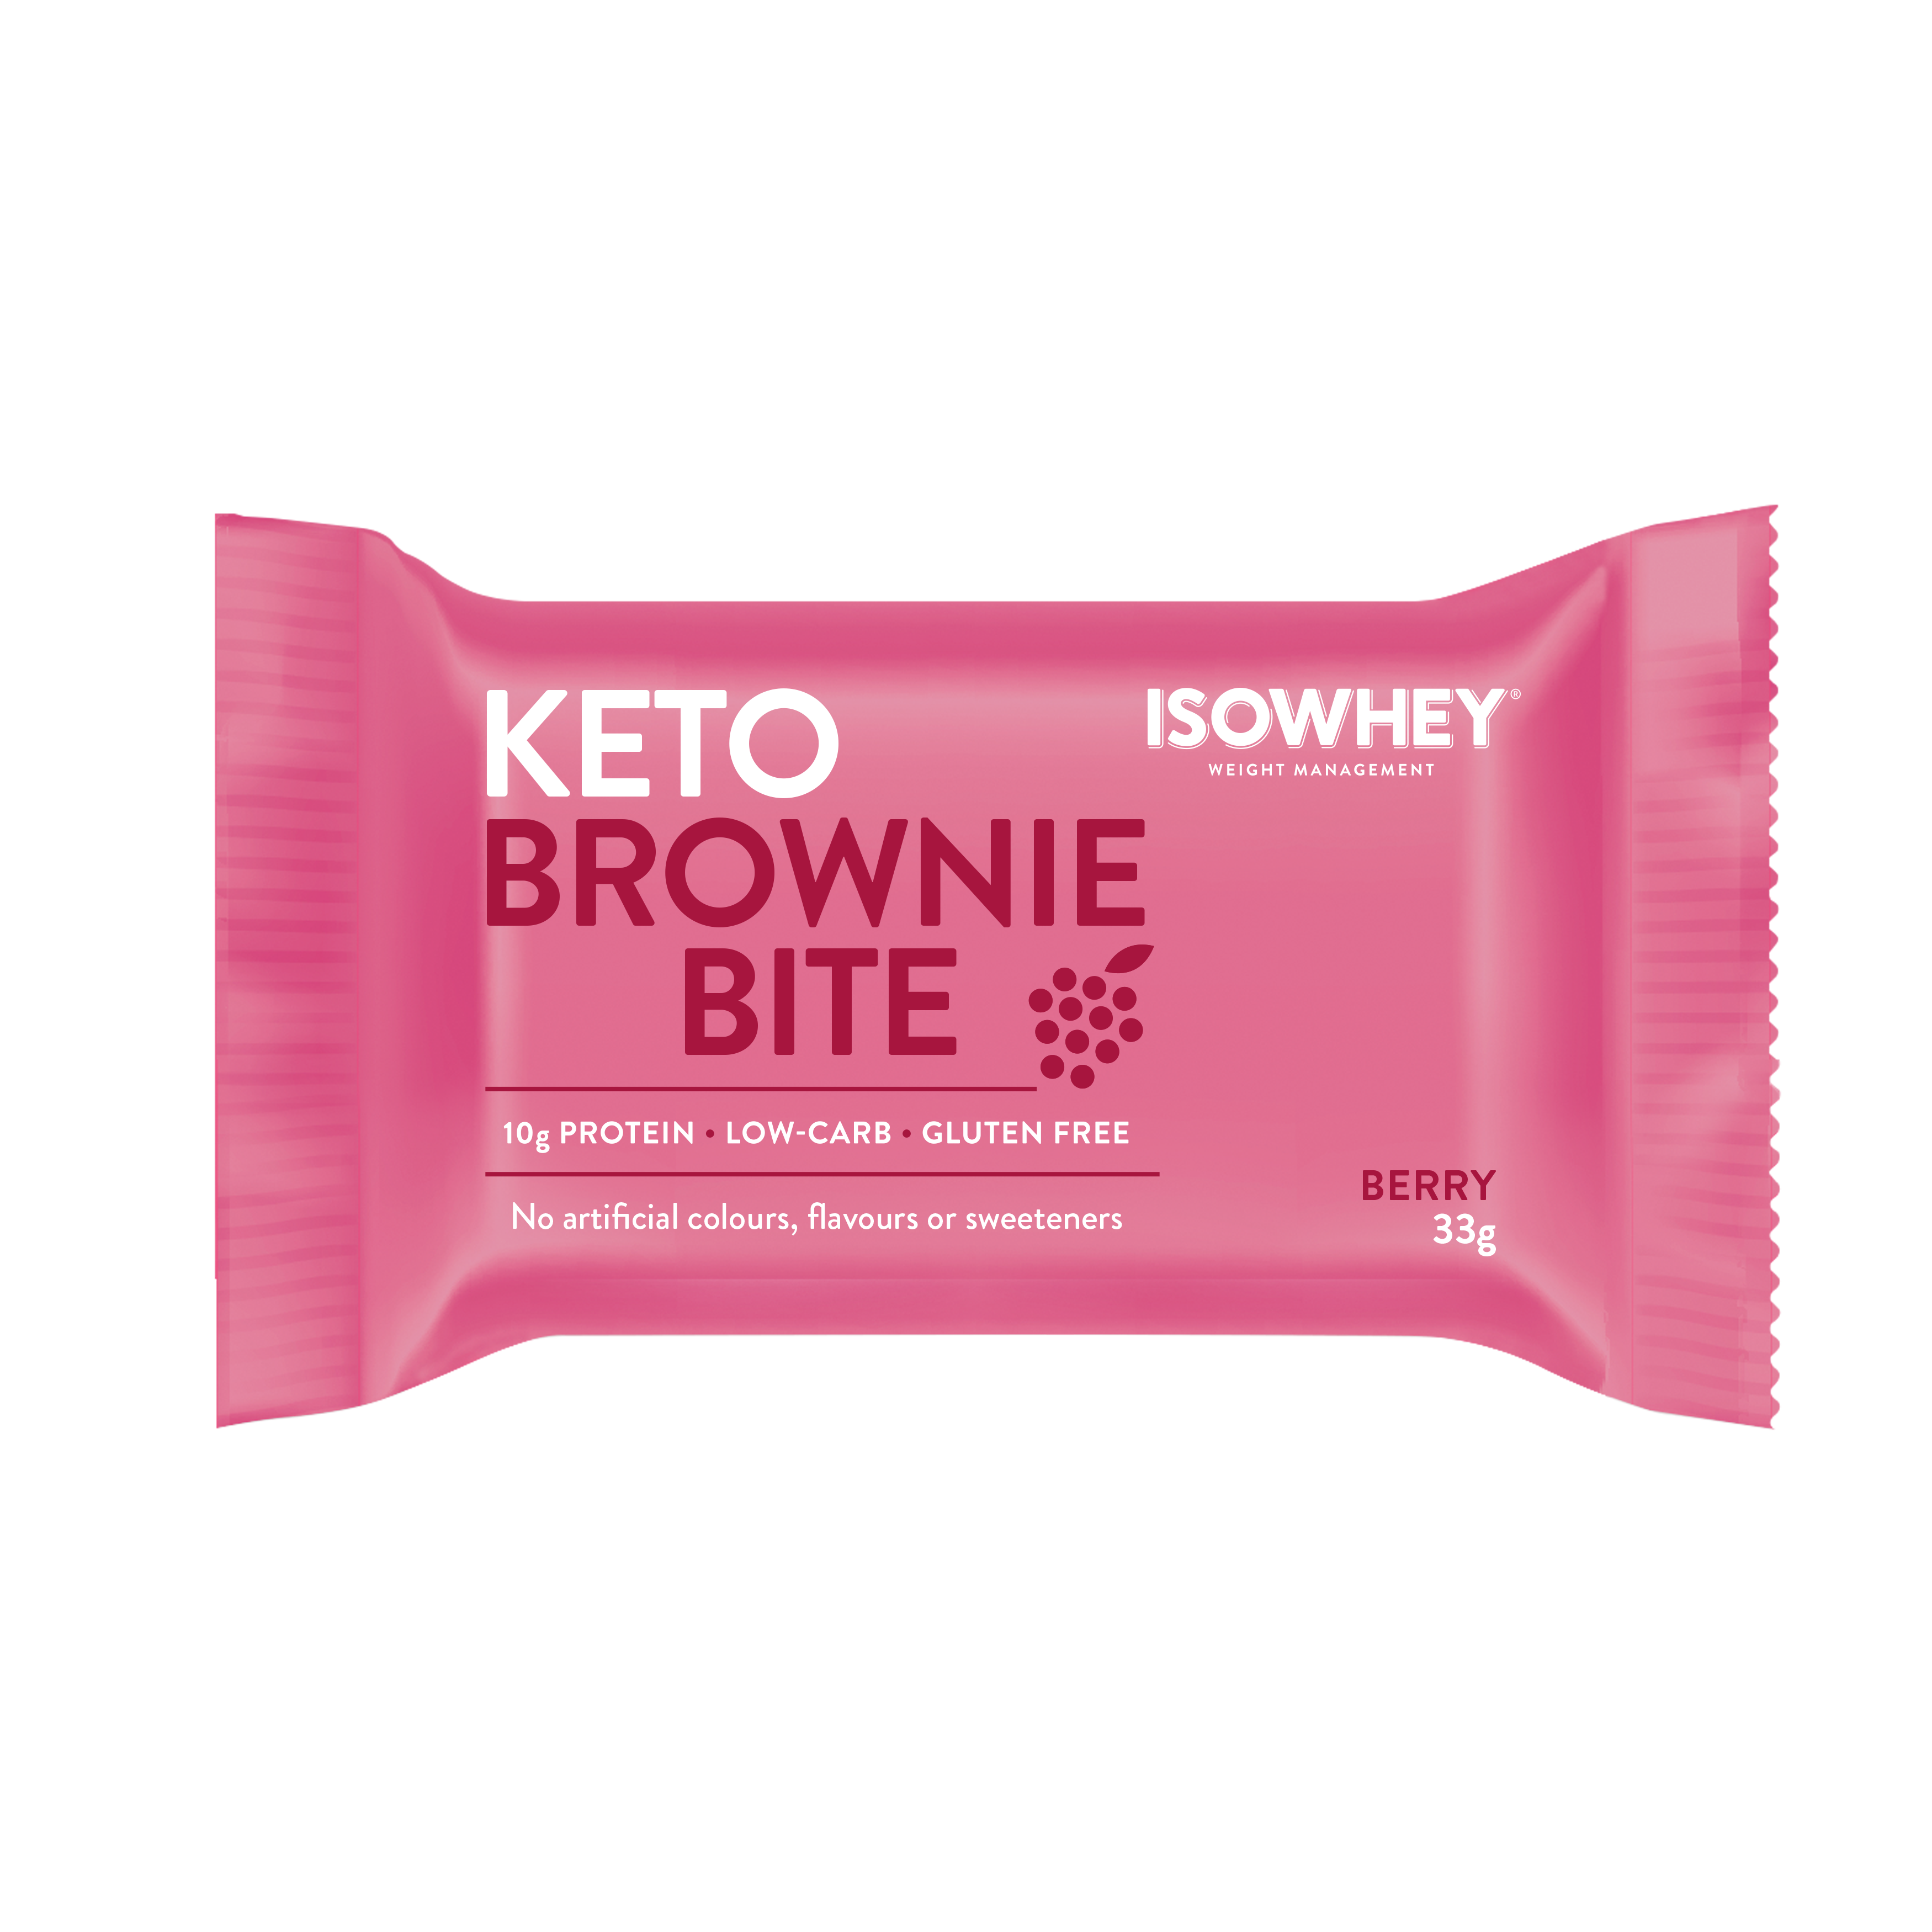 IsoWhey Keto Brownie Bite: Berry in single pillow pack 33G